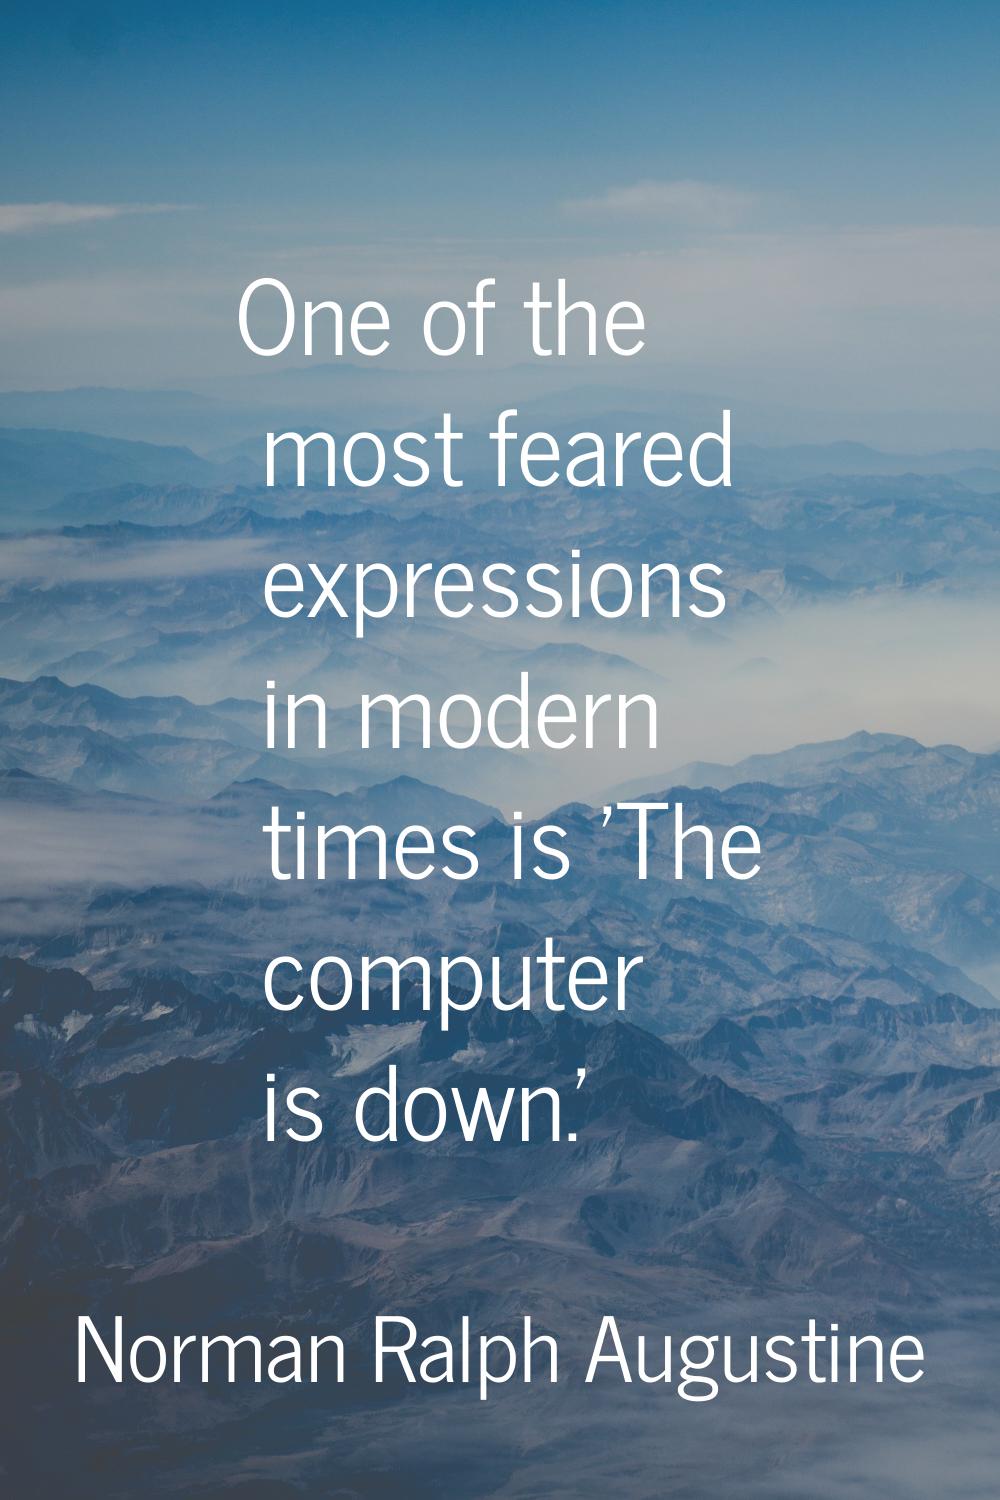 One of the most feared expressions in modern times is 'The computer is down.'